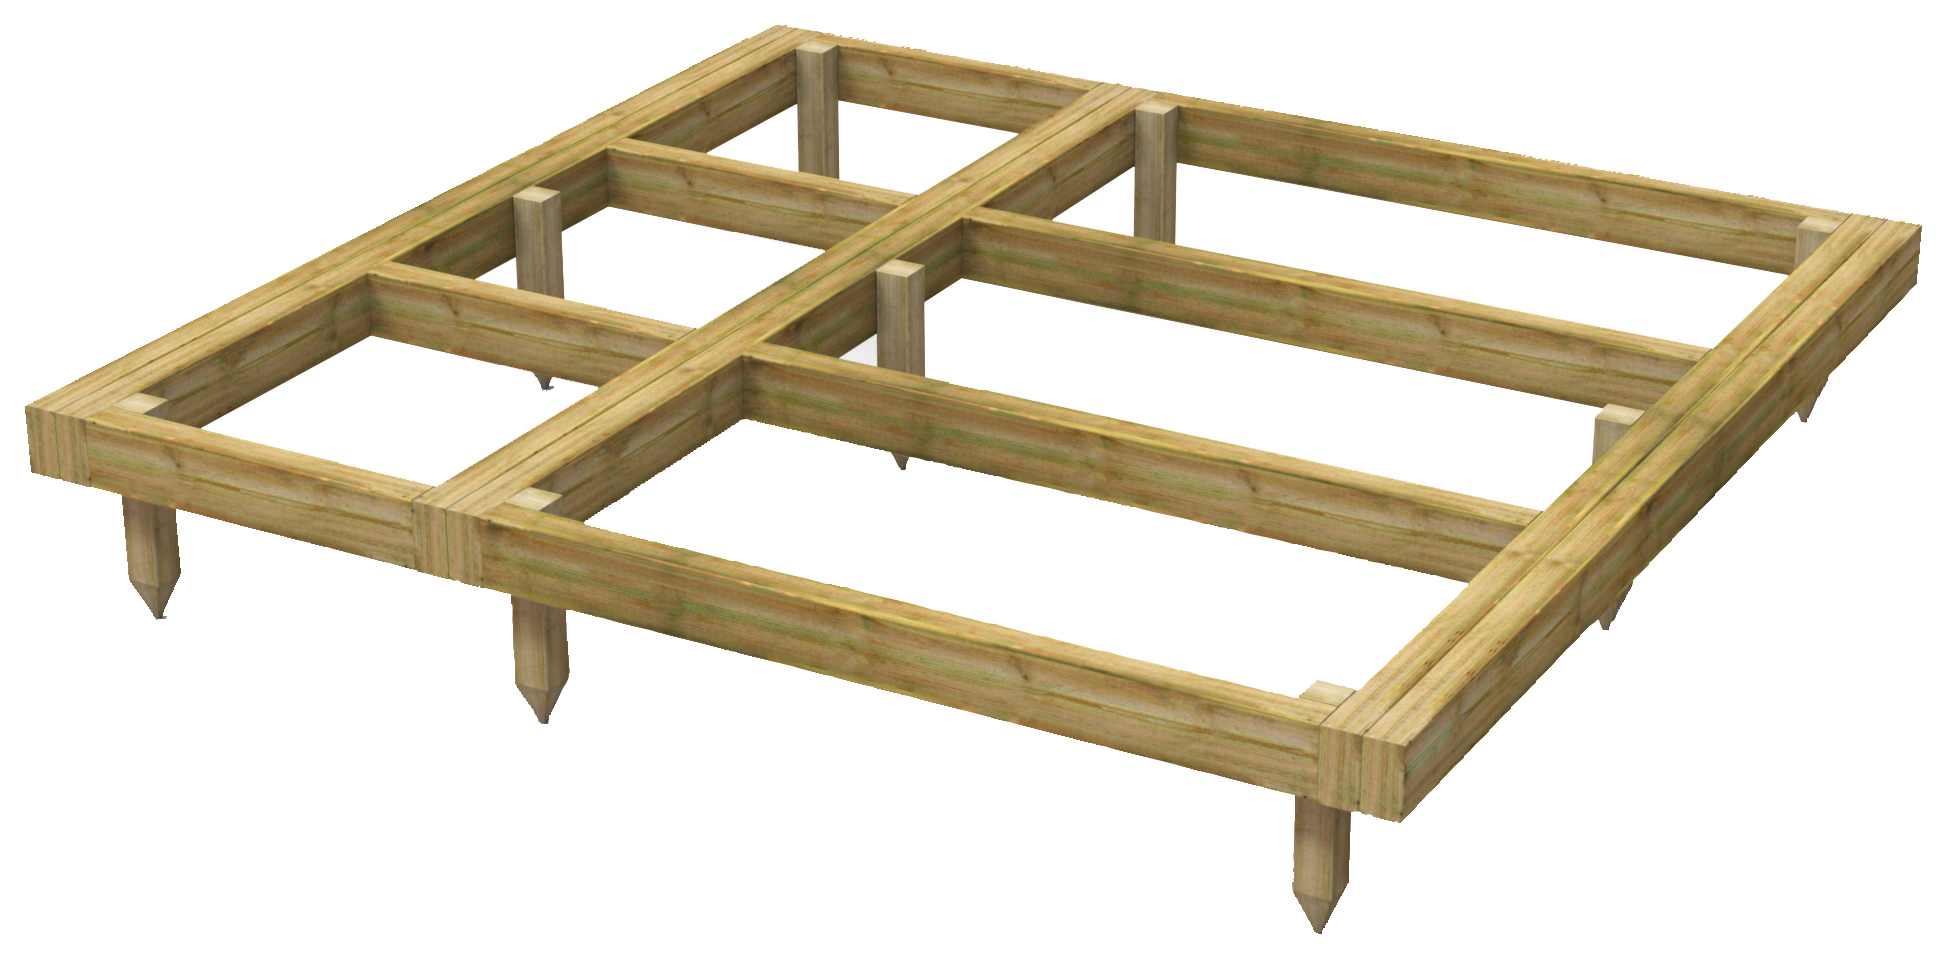 Image of Power Sheds 6 x 6ft Pressure Treated Garden Building Base Kit